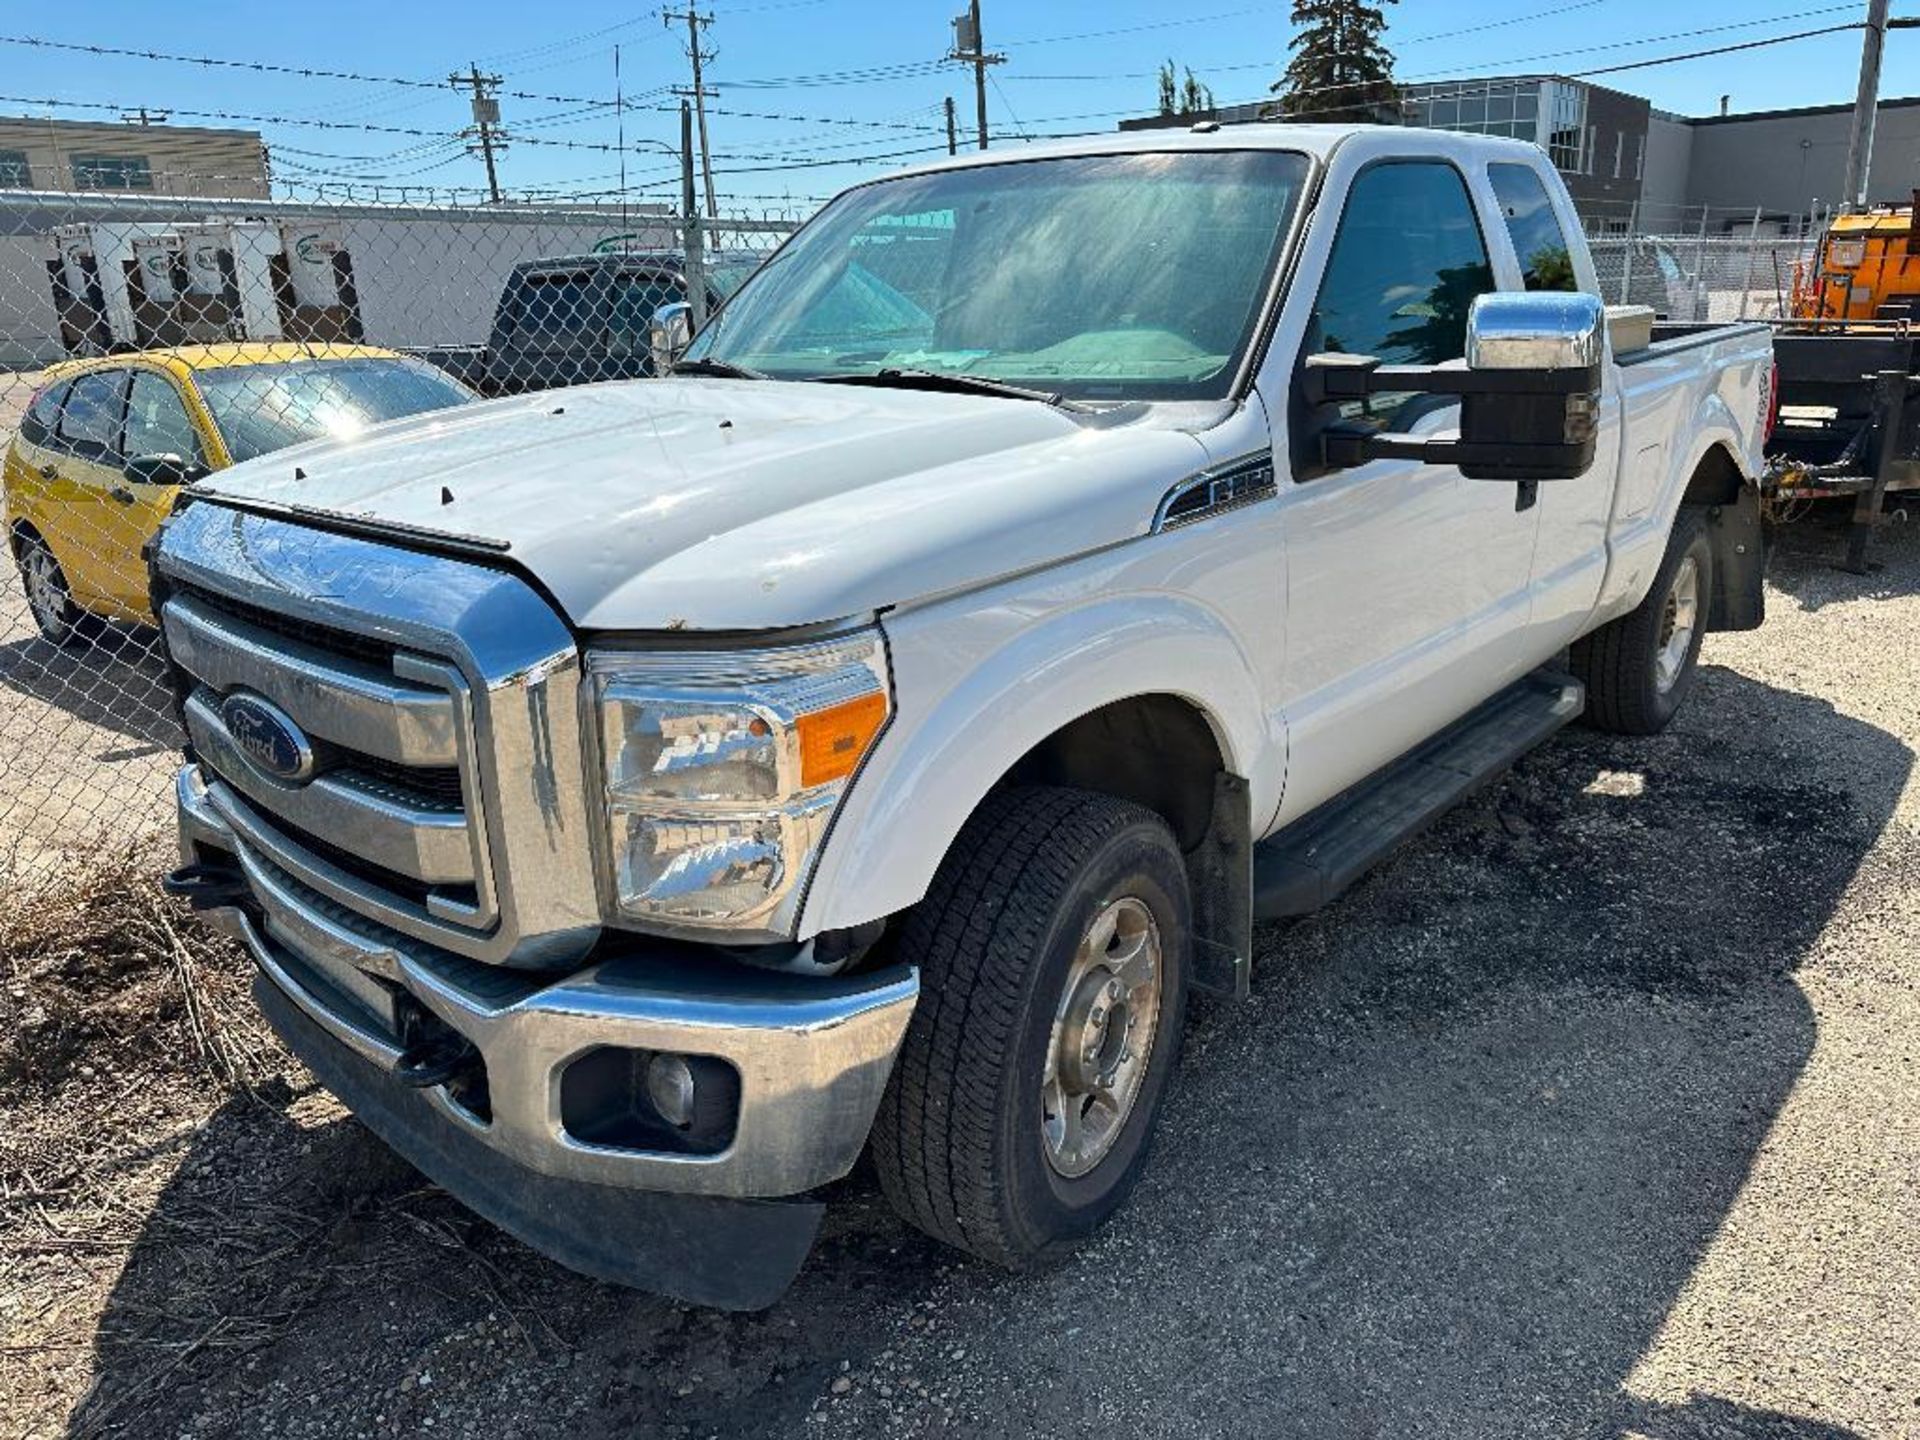 2015 Ford F-250 XLT Ext. Cab Pickup Truck, 238,245 kms Showing, VIN: 1FT7X2B67FEC06435 - Image 2 of 11